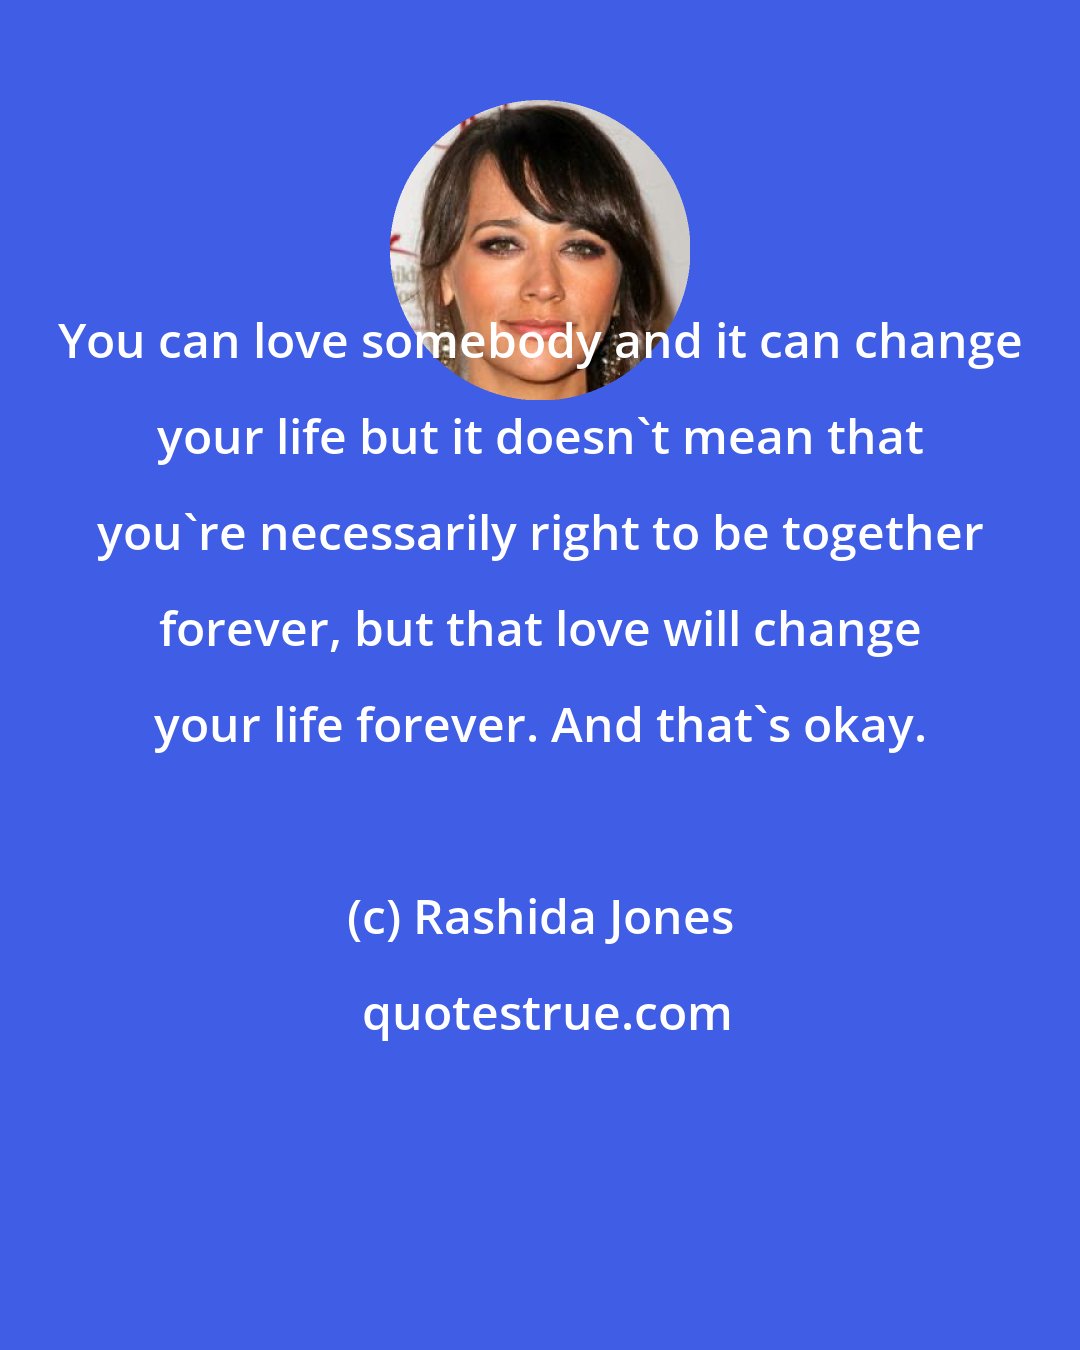 Rashida Jones: You can love somebody and it can change your life but it doesn't mean that you're necessarily right to be together forever, but that love will change your life forever. And that's okay.